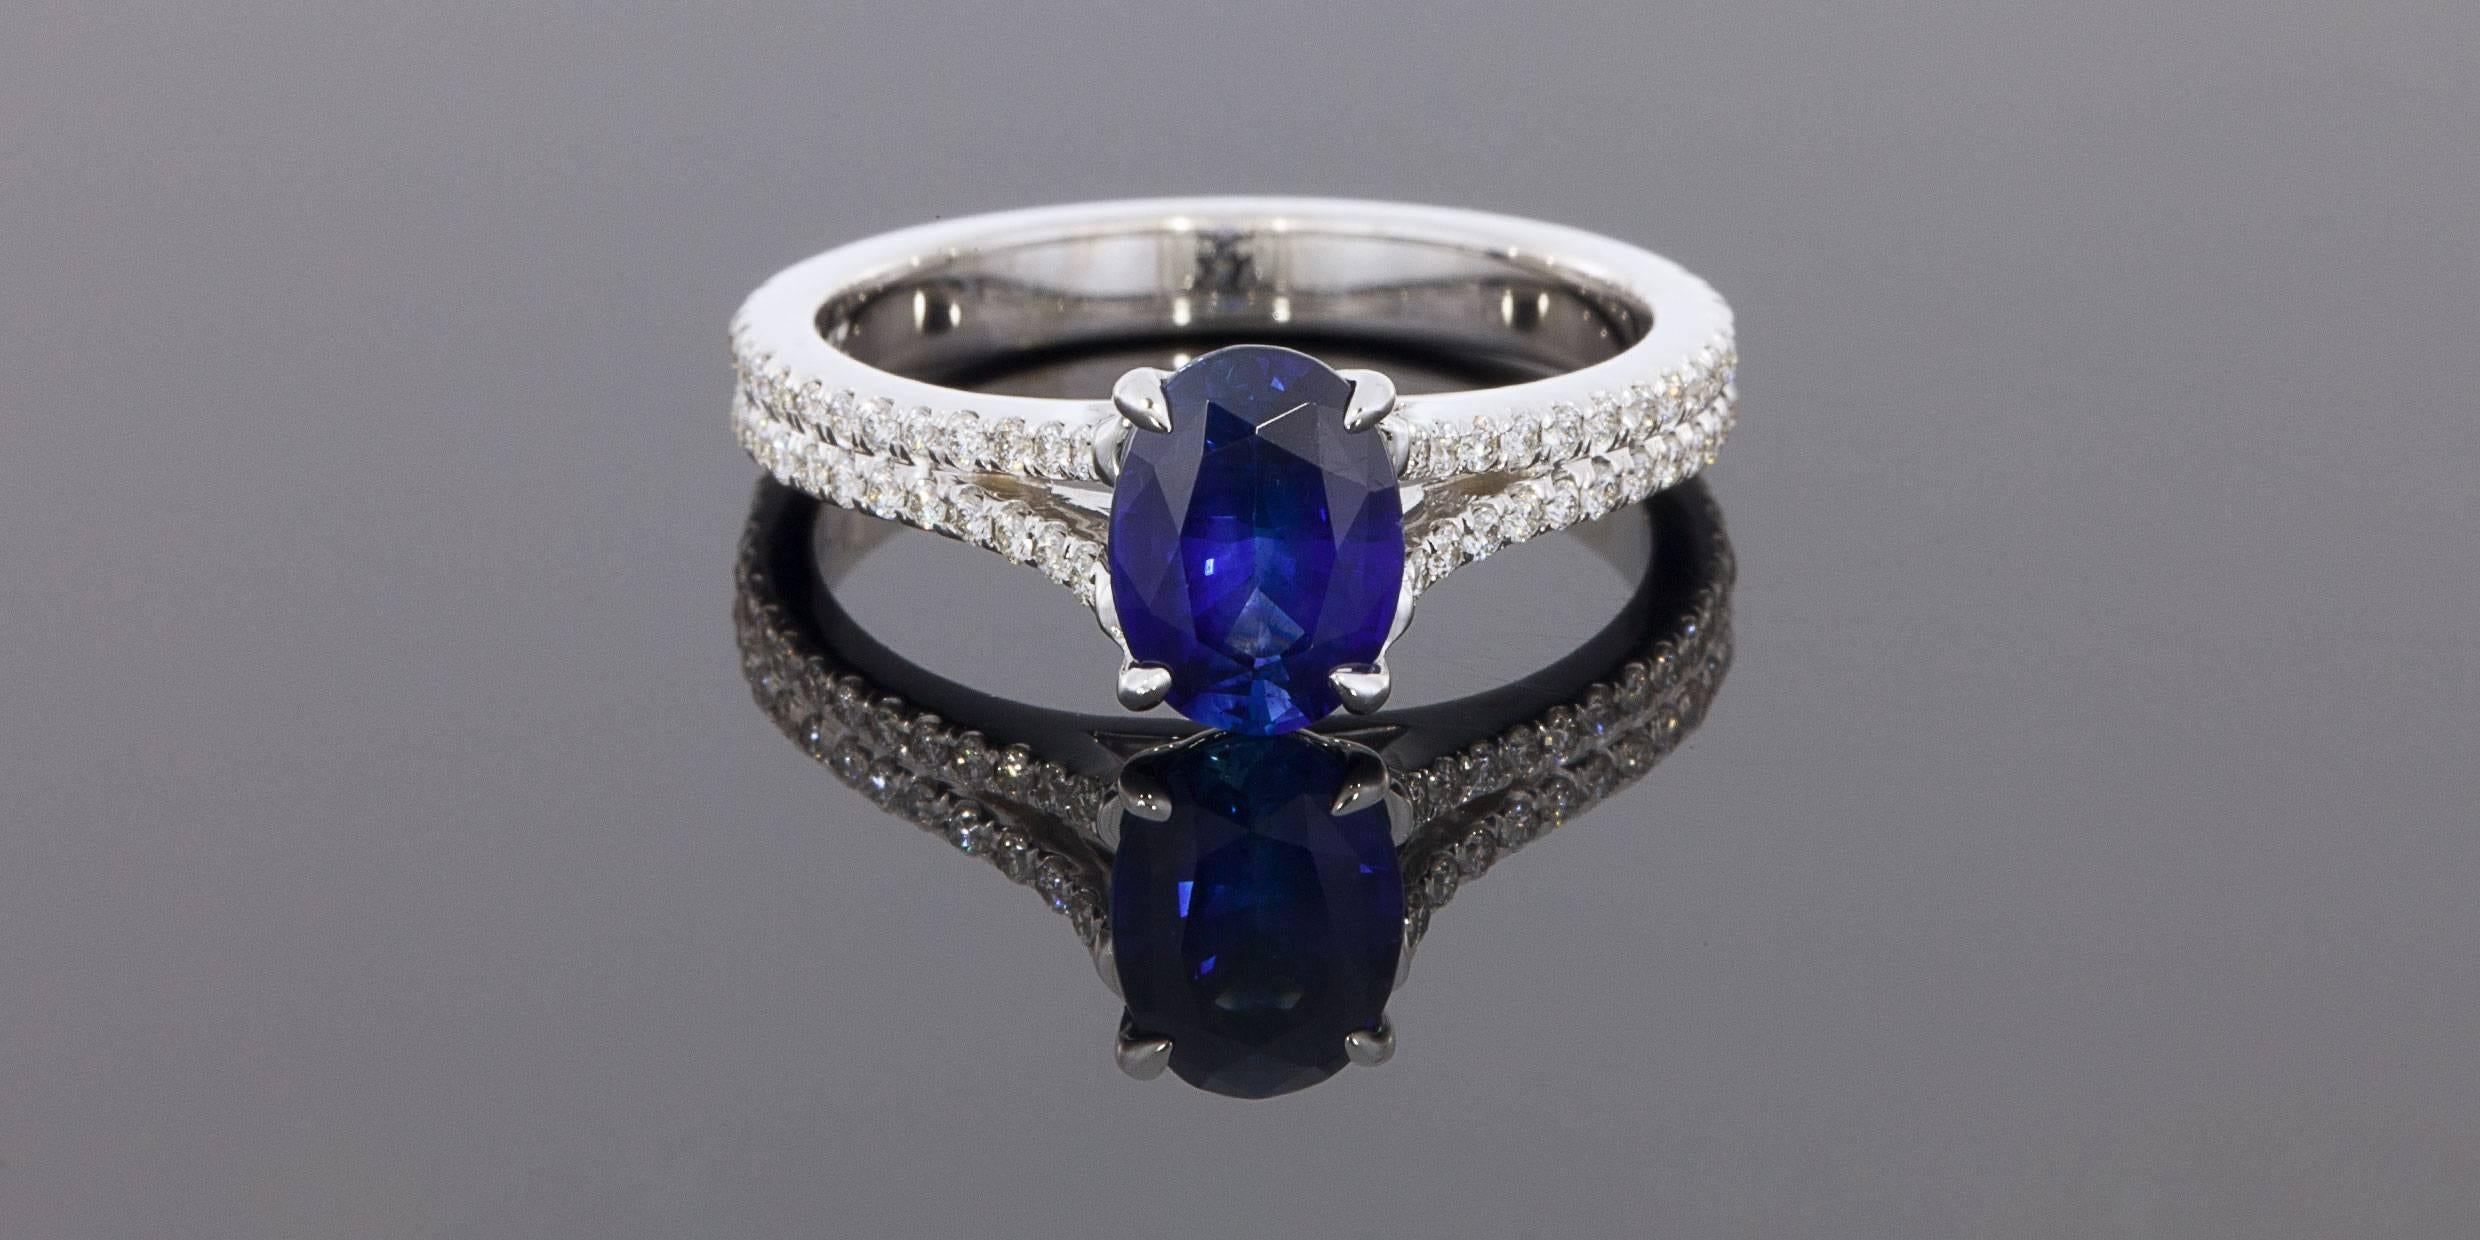 This breathtaking ring features a 1.36 carat, natural, AAA quality, oval, blue sapphire. This gorgeous sapphire has exceptionally beautiful blue color that can hardly be captured by pictures. It is prong set in a custom made, 14 karat white gold